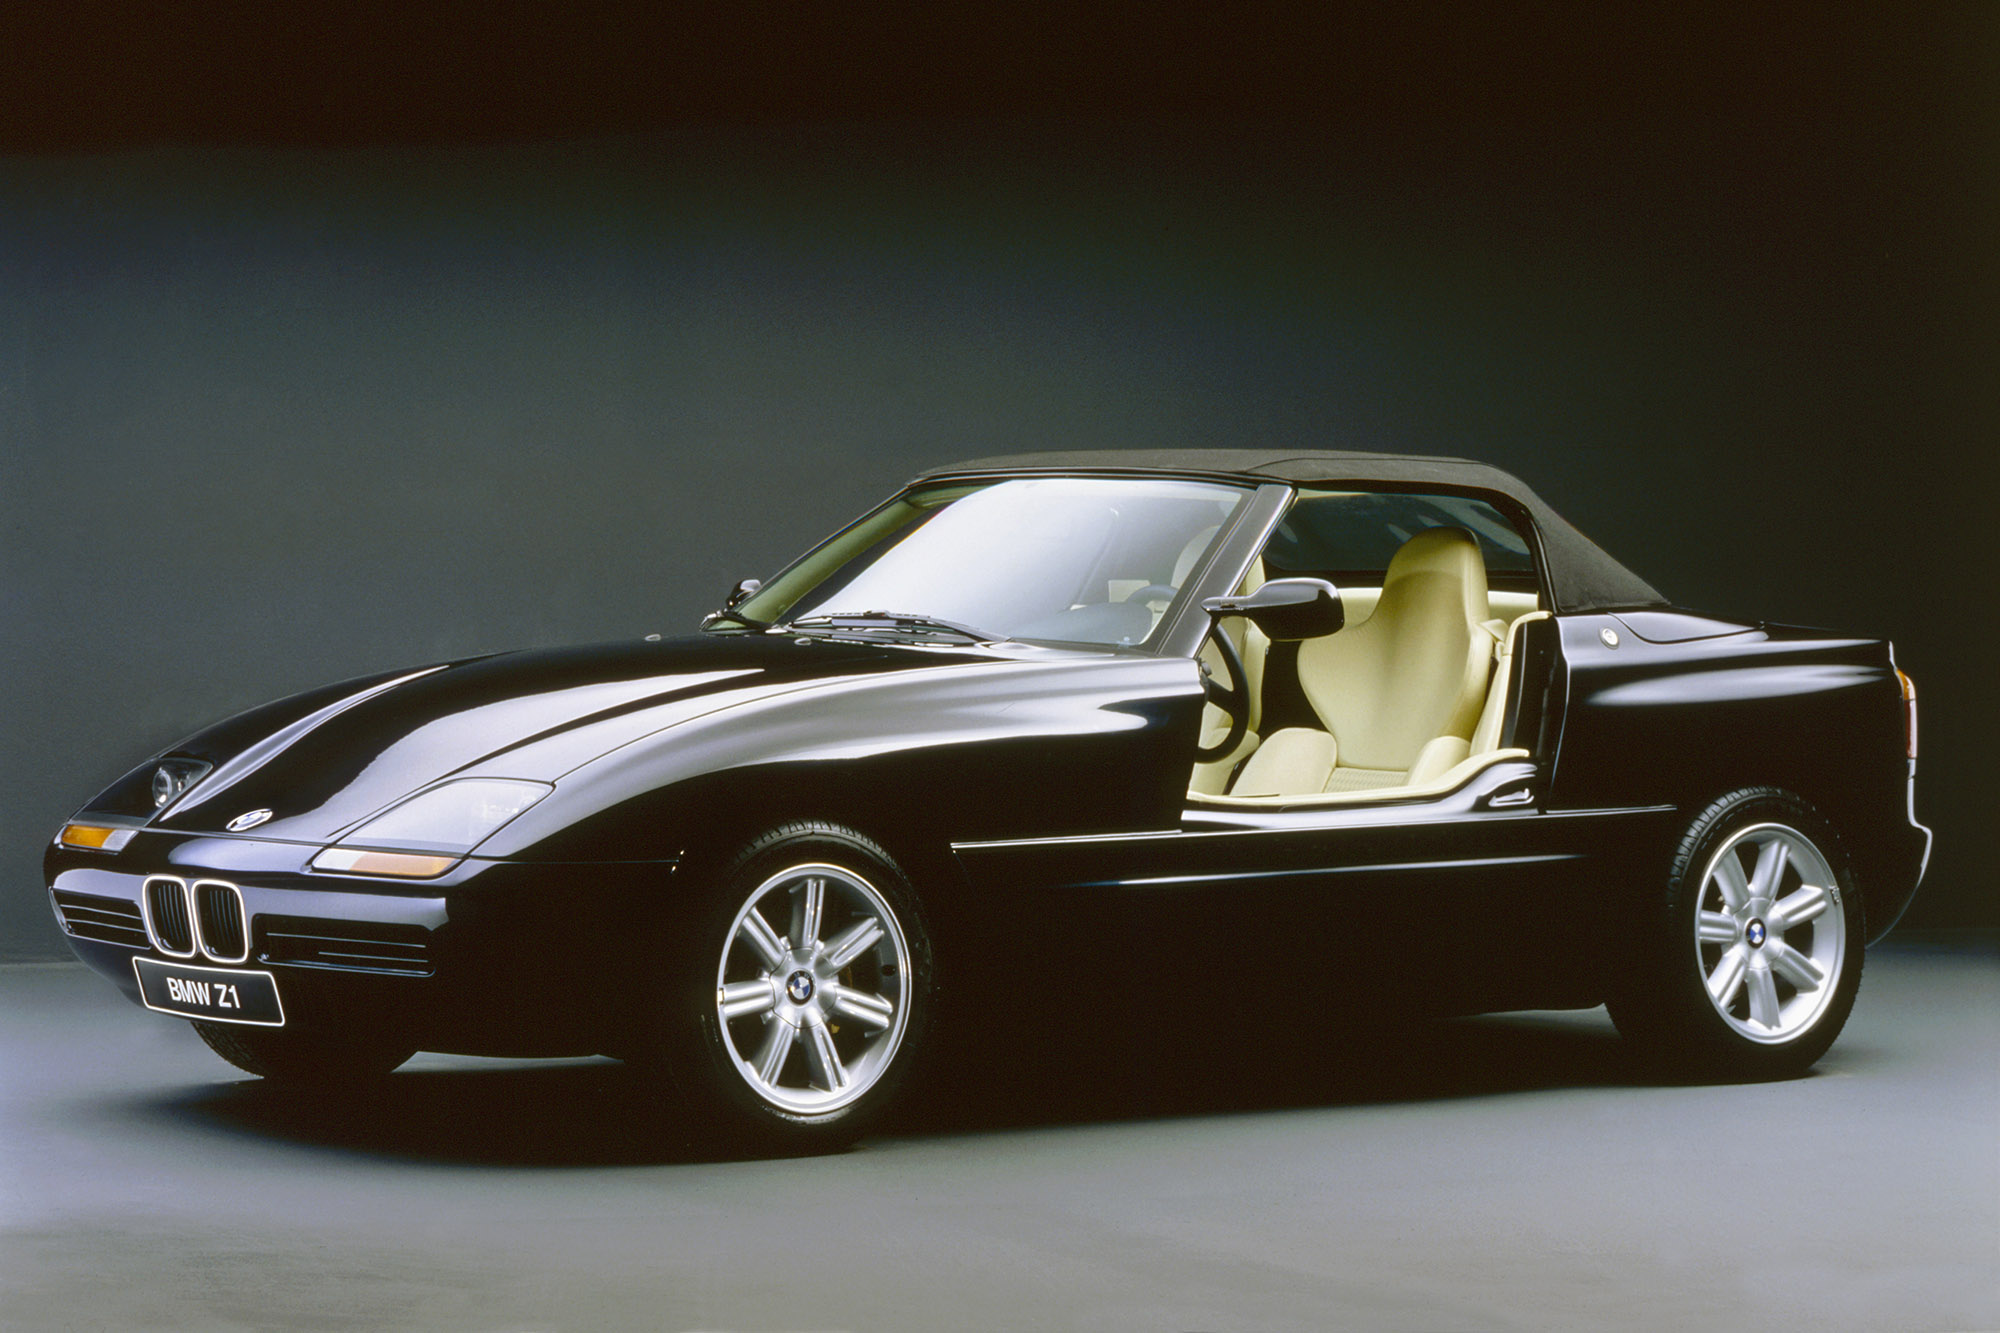 Black BMW Z1 convertible with sliding doors down.